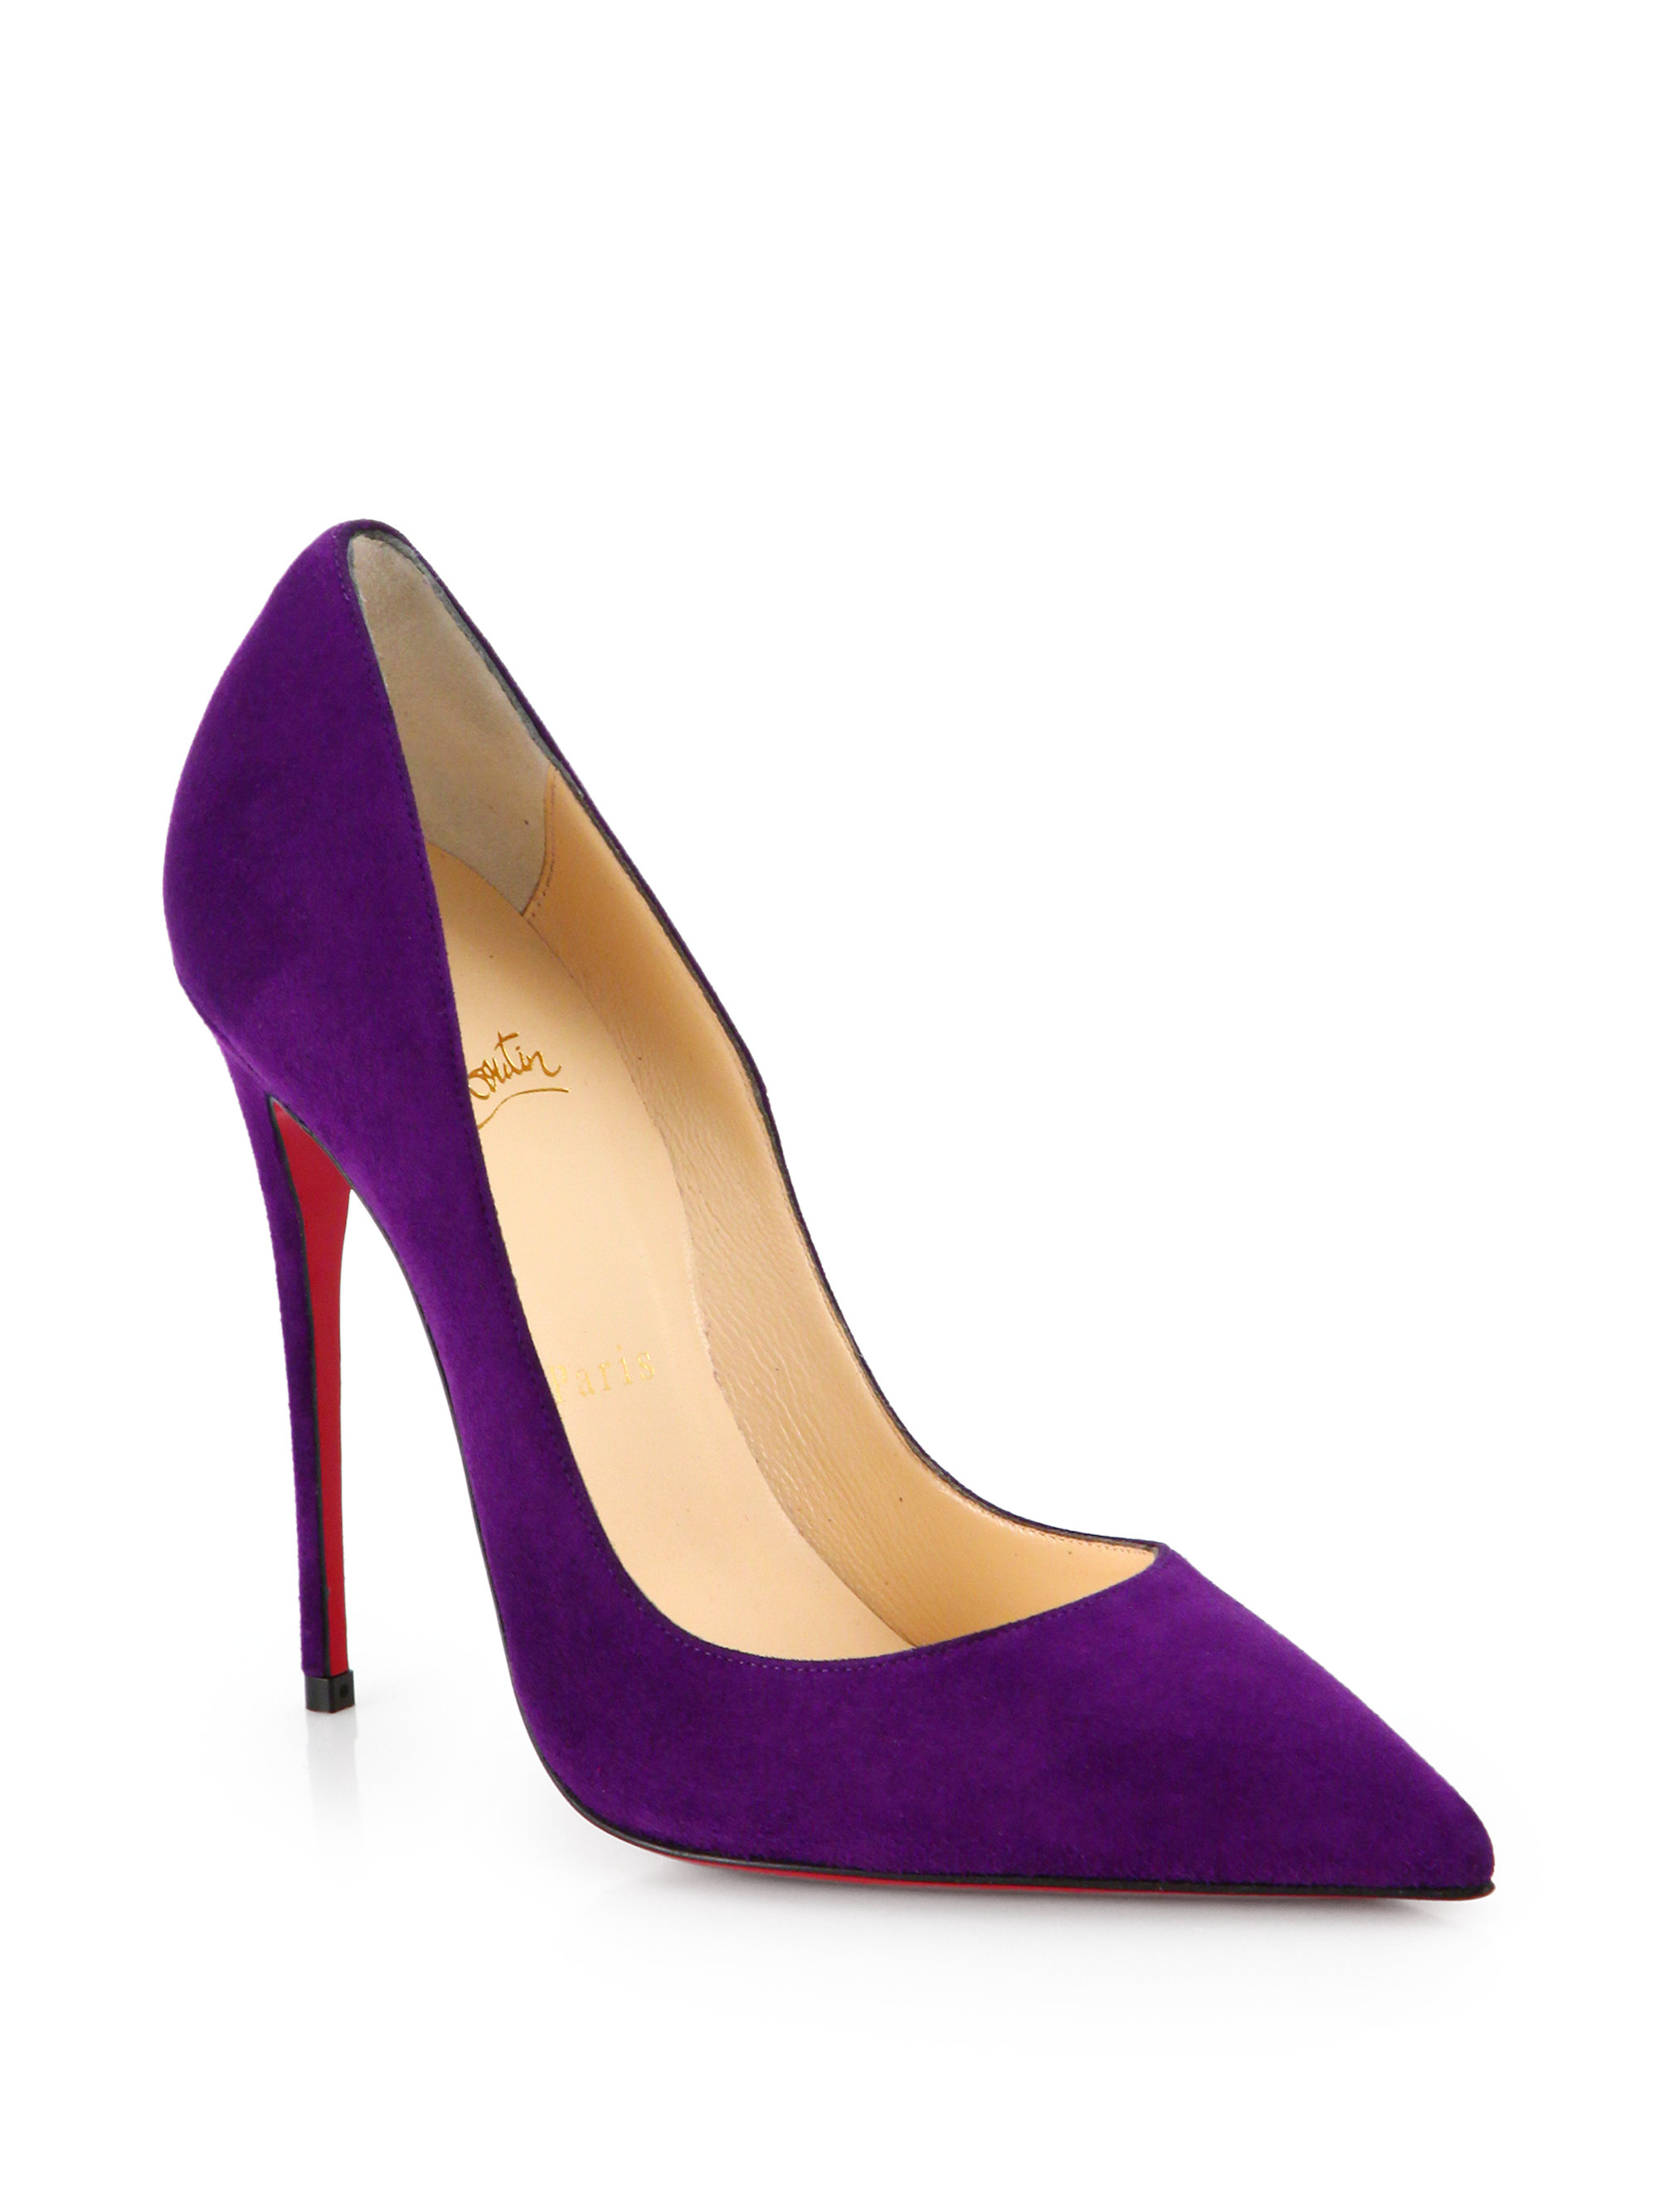 Christian louboutin So Kate Suede Pumps in Purple (VIOLET) | Lyst